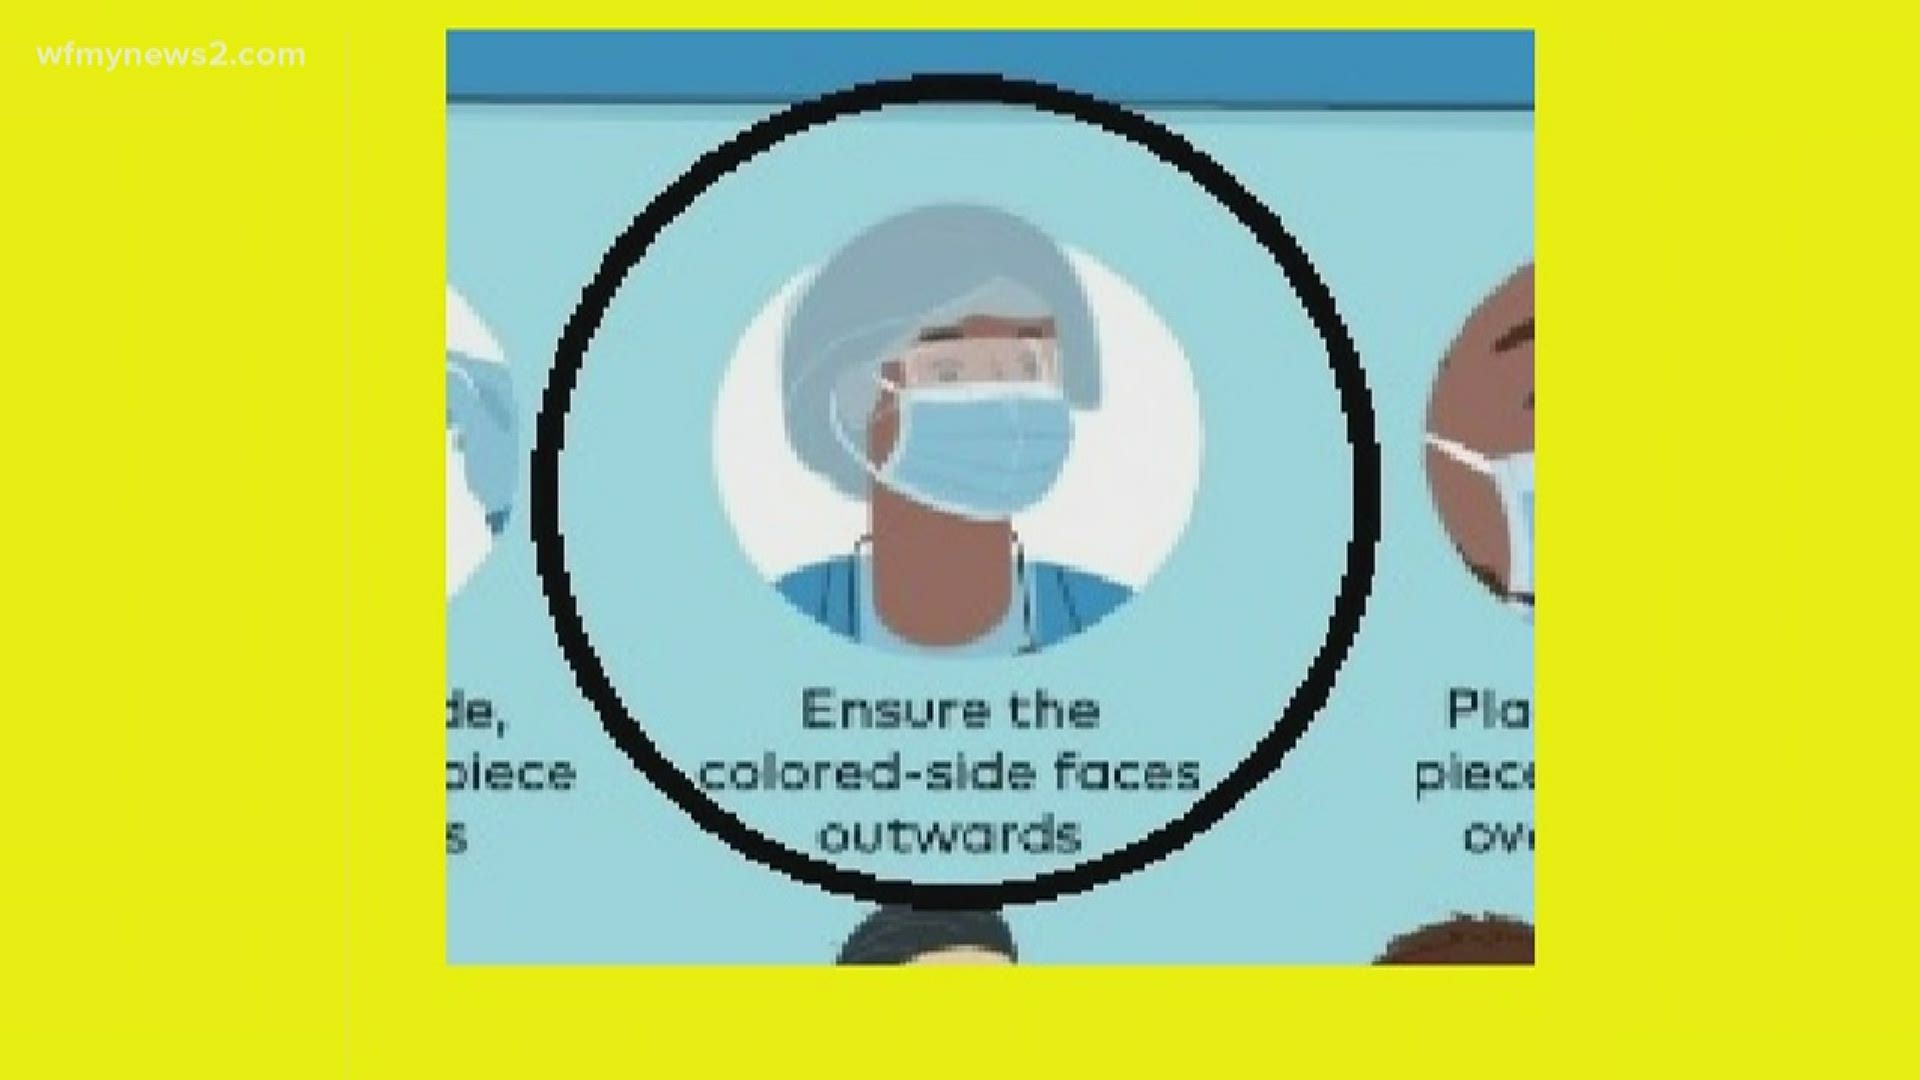 If you’re wearing a blue and white surgical mask, there is a right and a wrong way to wear it.